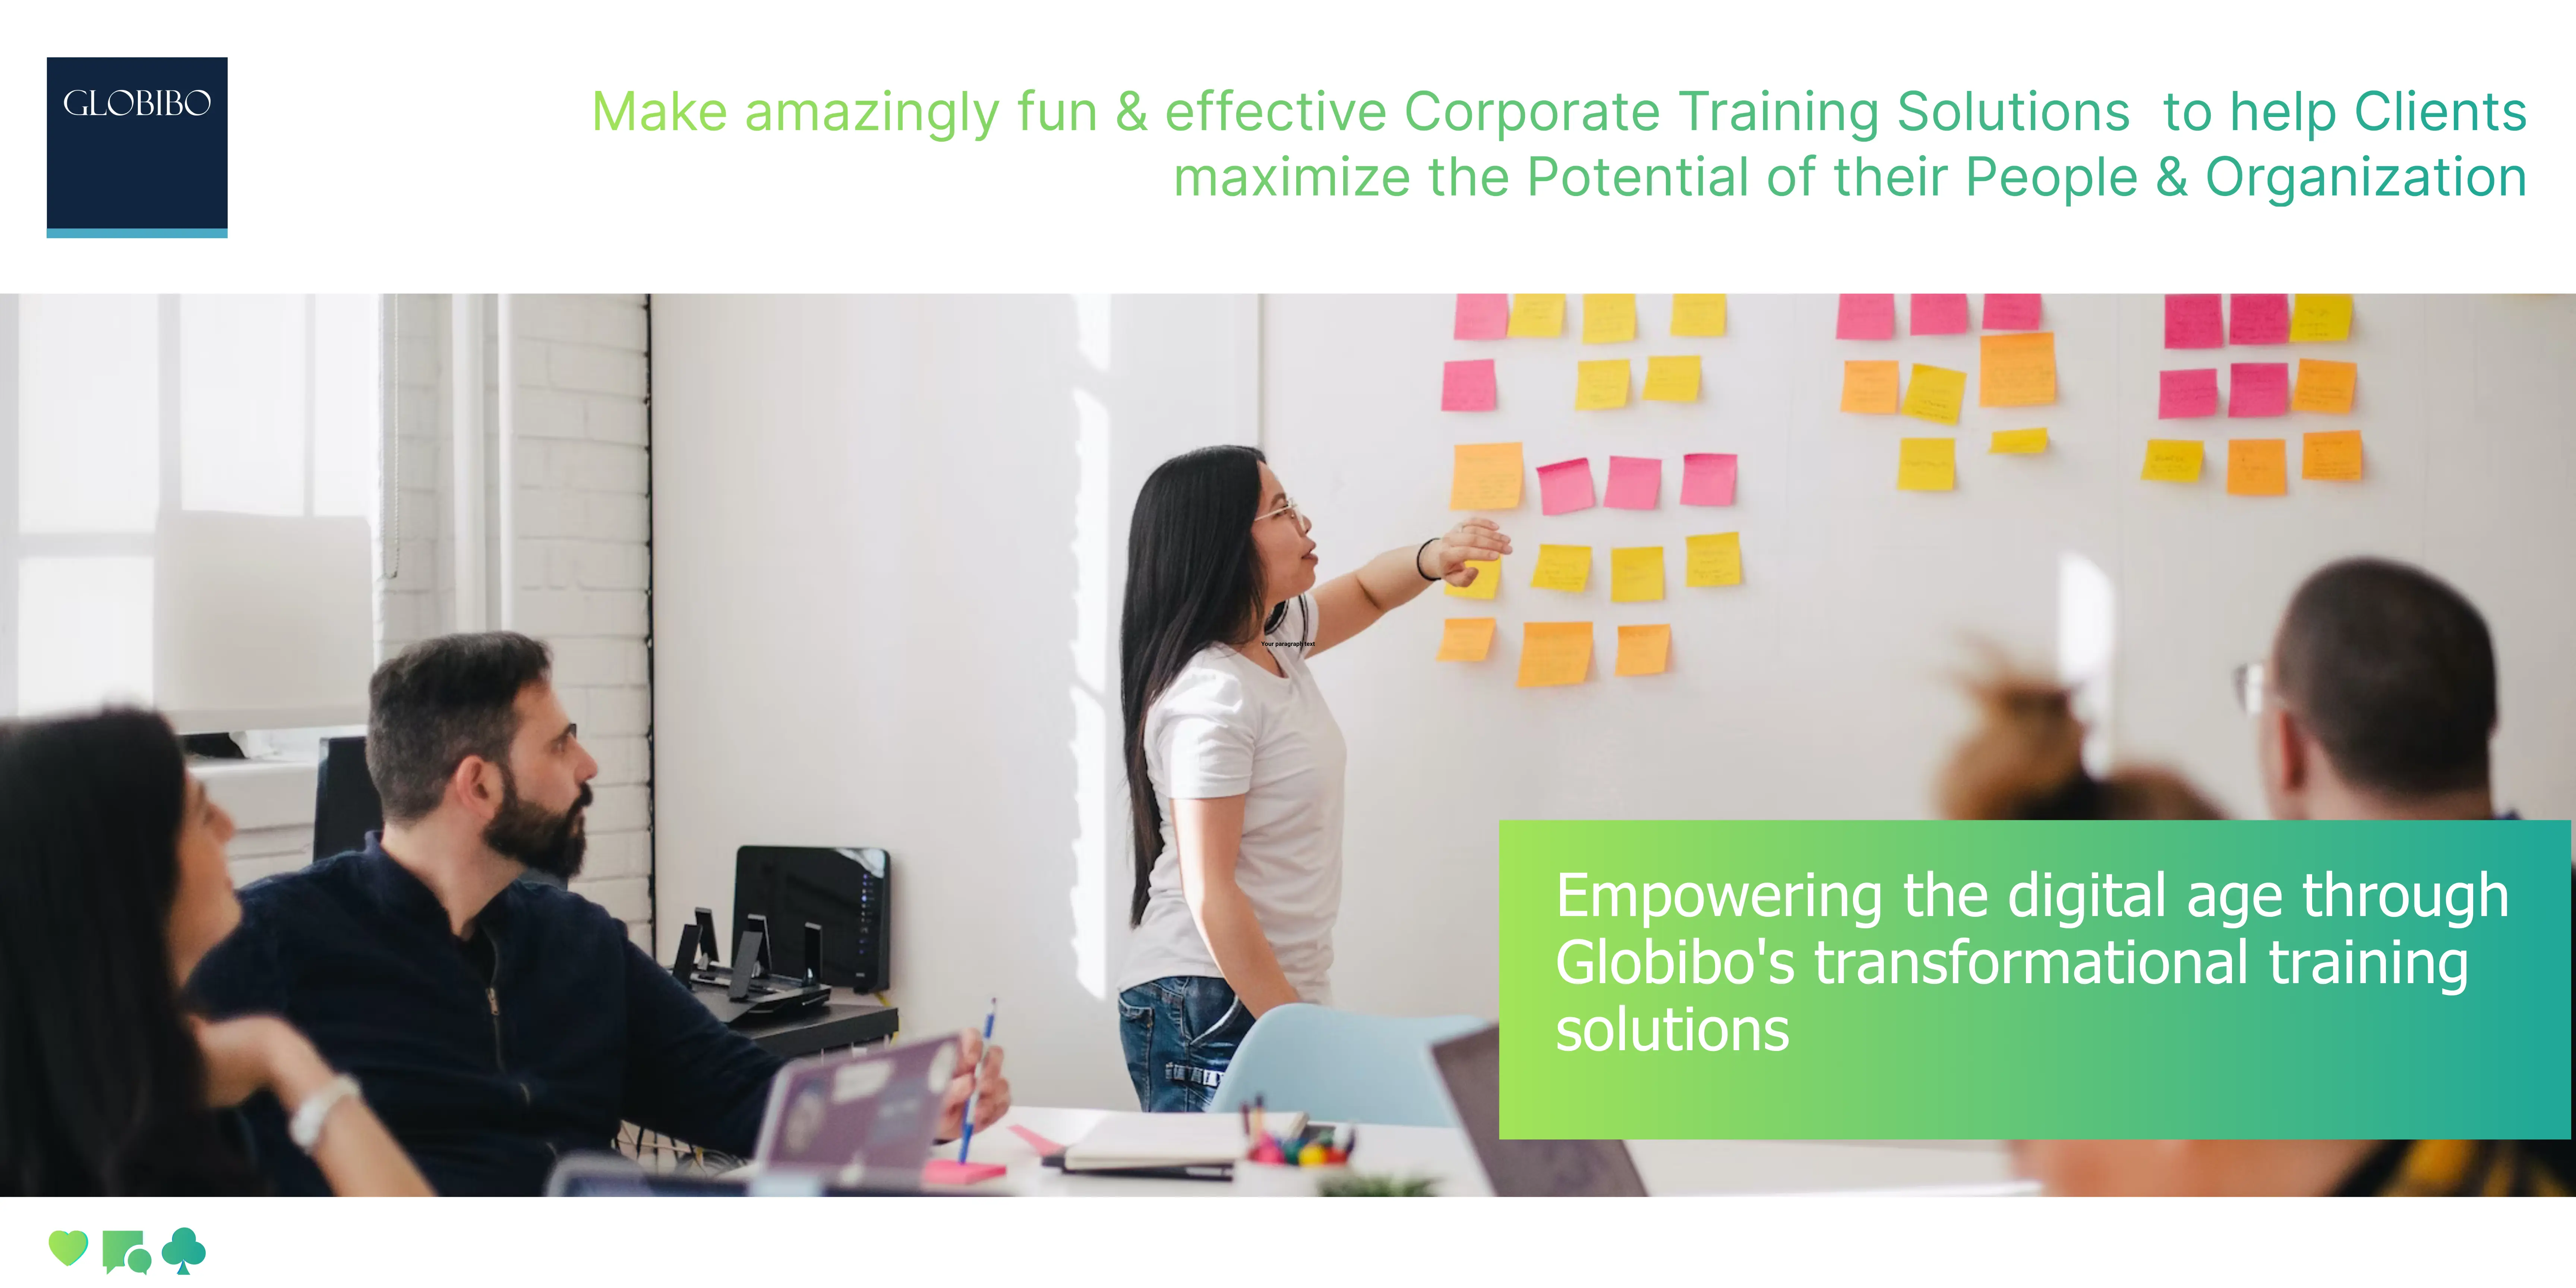 Empowering the Digital Age through Globibo’s Transformational Training Solutions